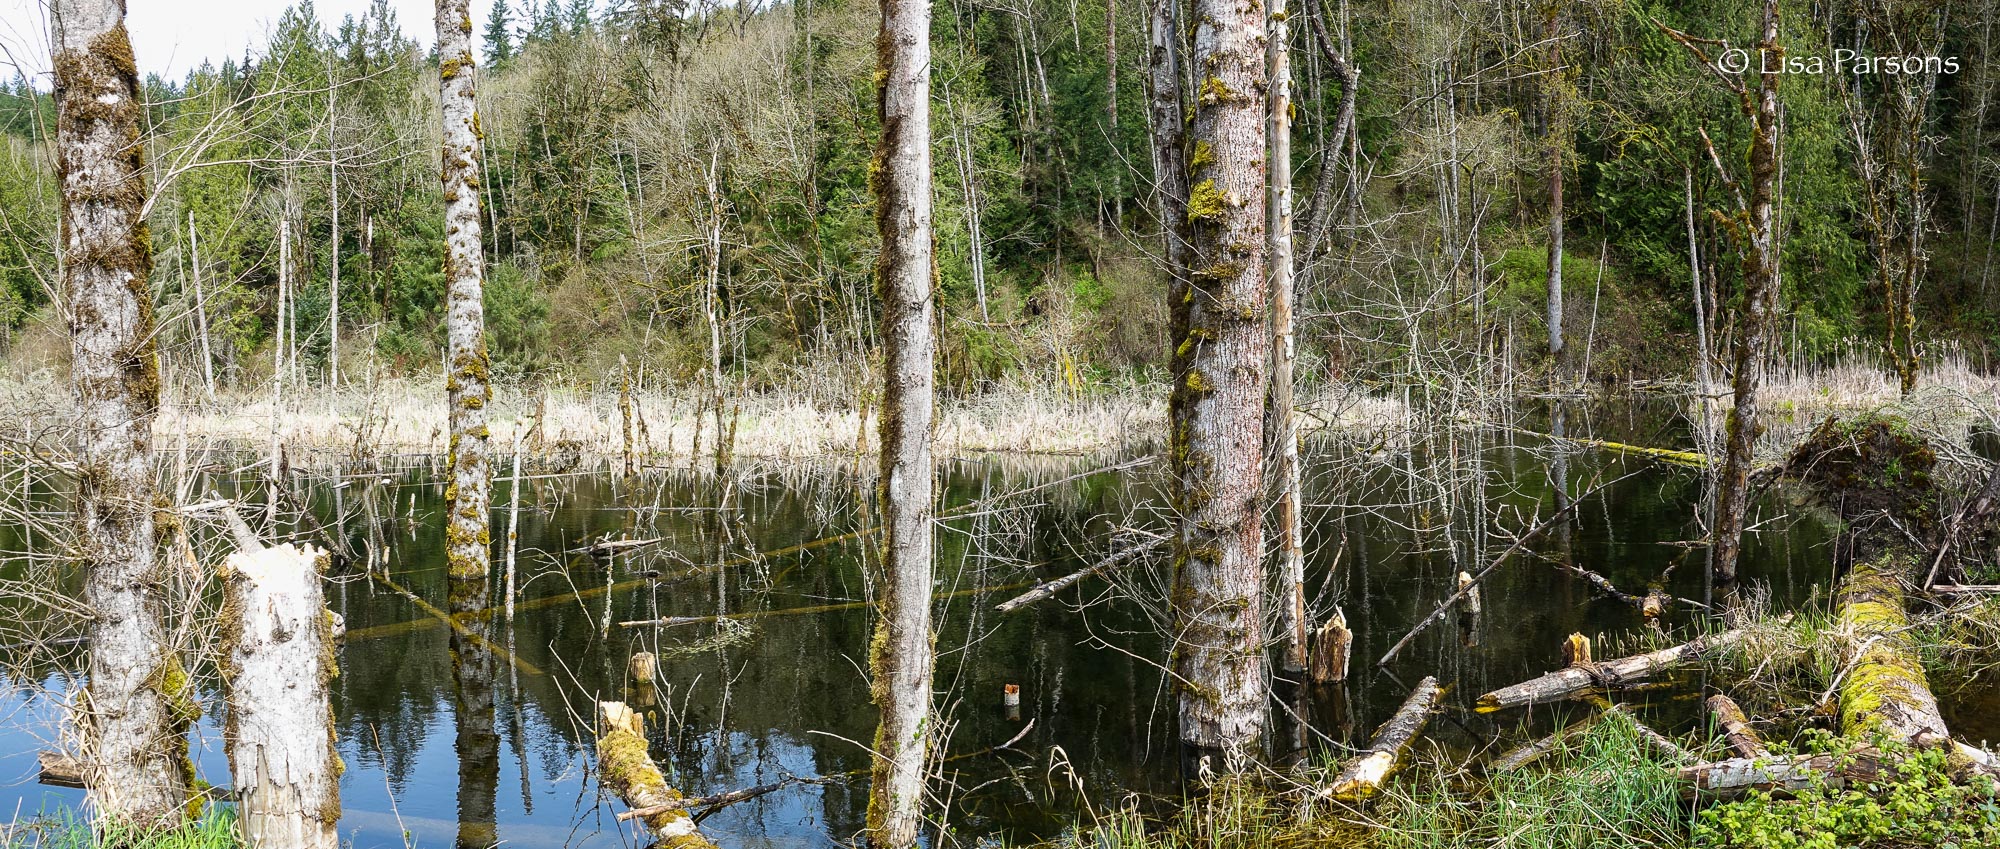 More Wetland Along Forest Edge